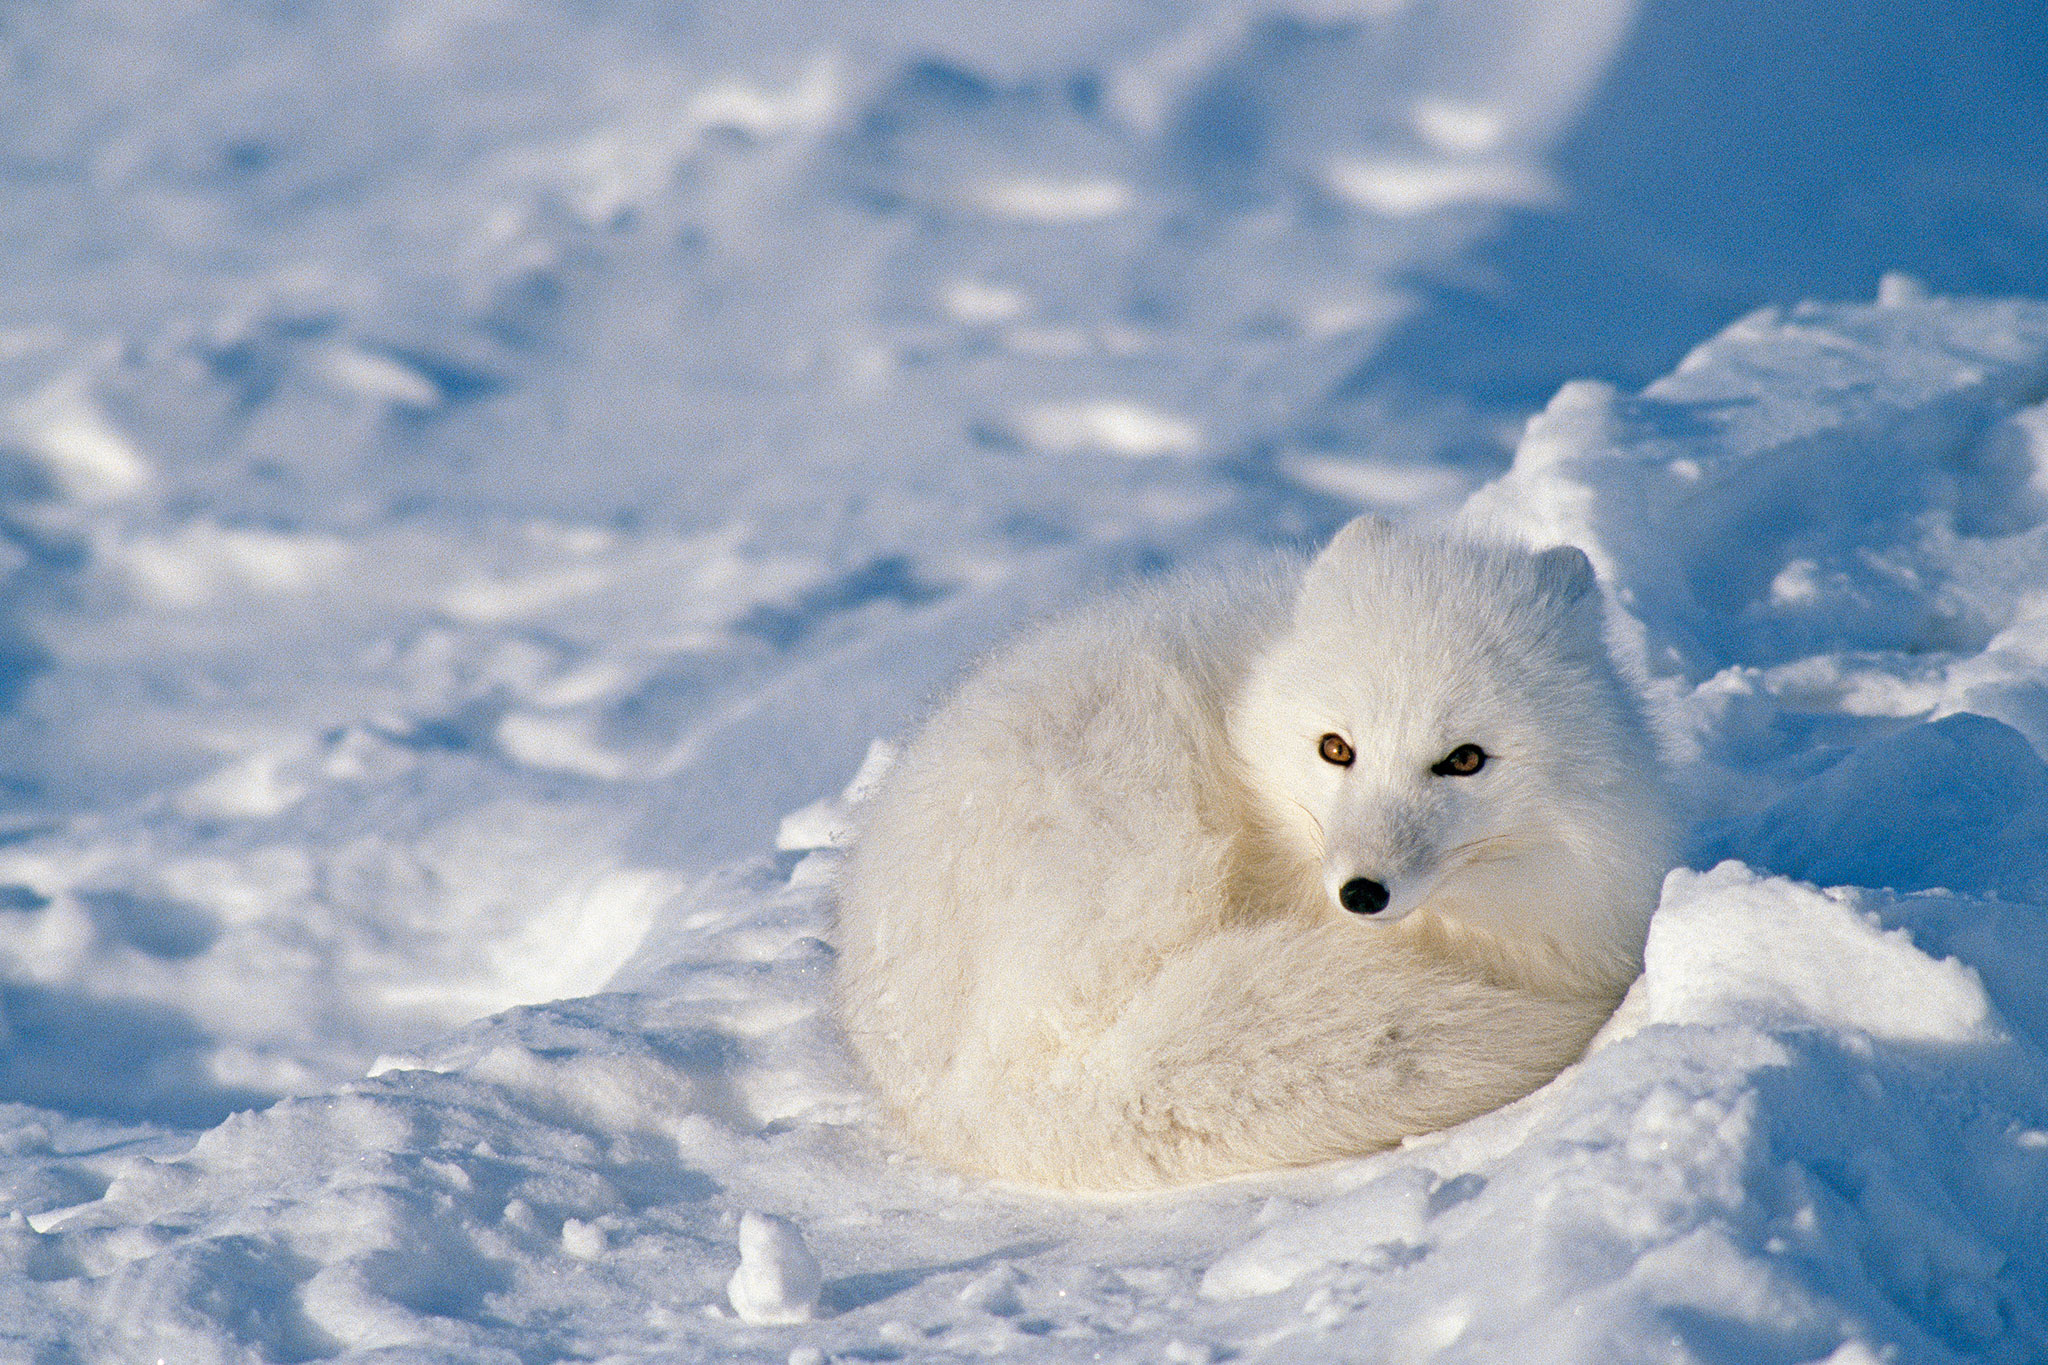 Animals In Winter Wallpapers High Quality | Download Free